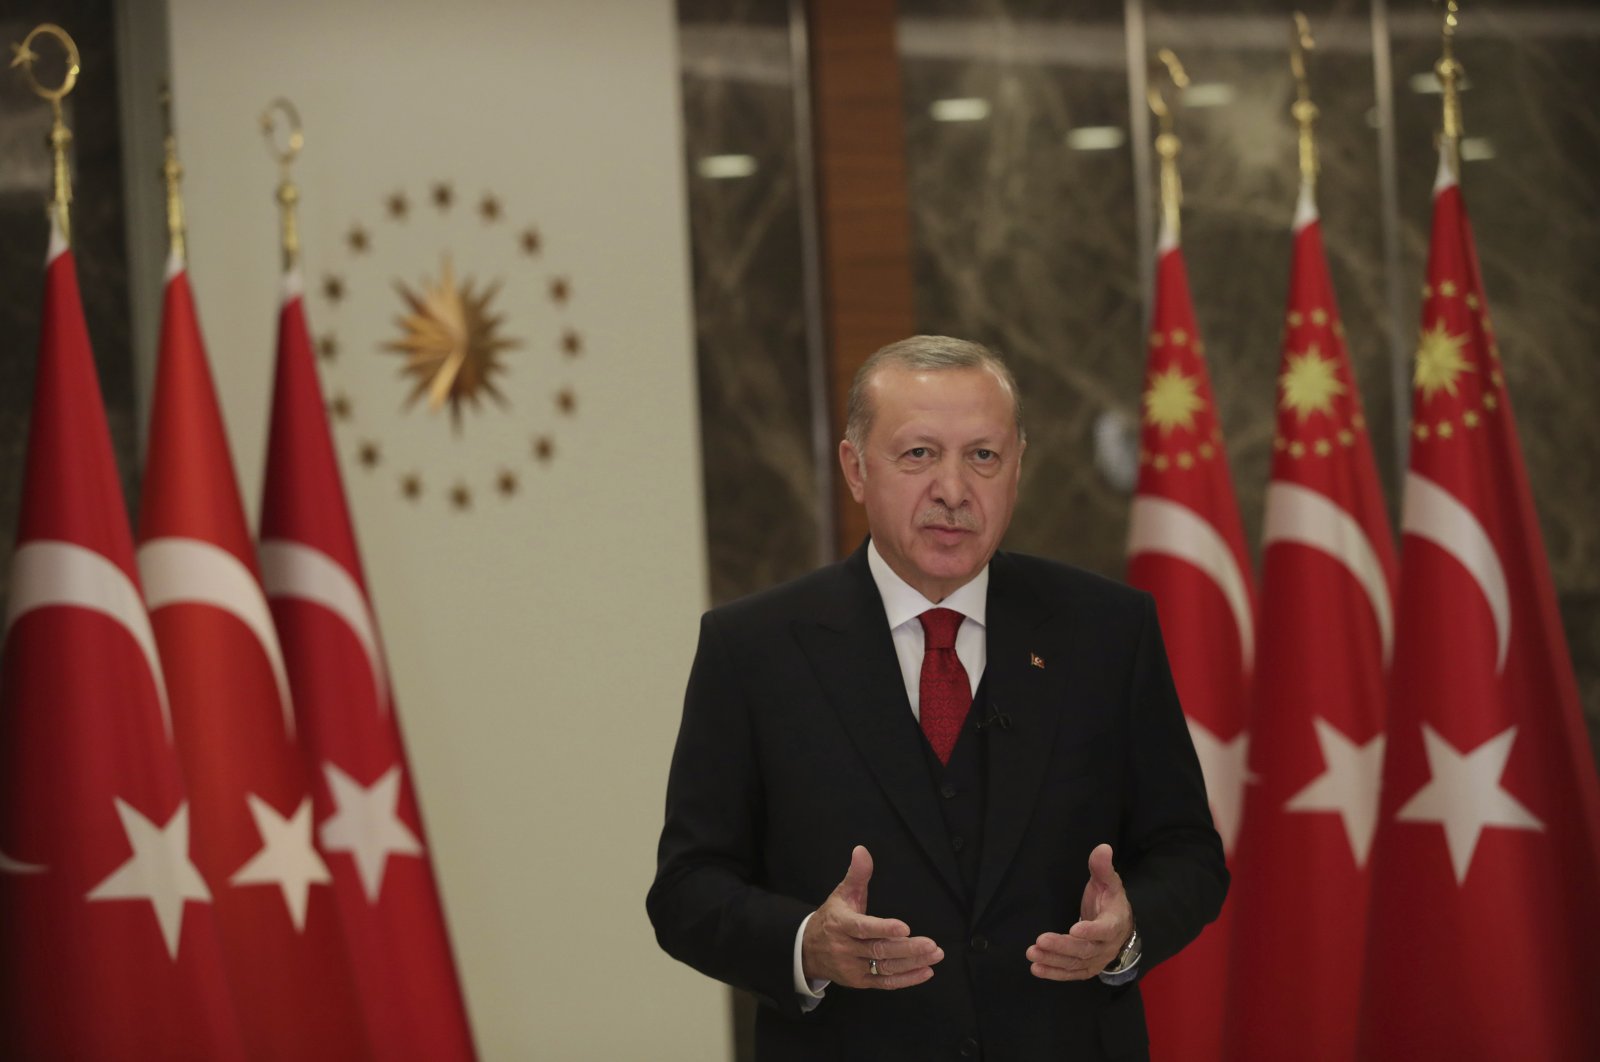 President Recep Tayyip Erdoğan stands during an event to mark Turkey's National Sovereignty and Children's Day, in Istanbul, April 23, 2020. (AP Photo)